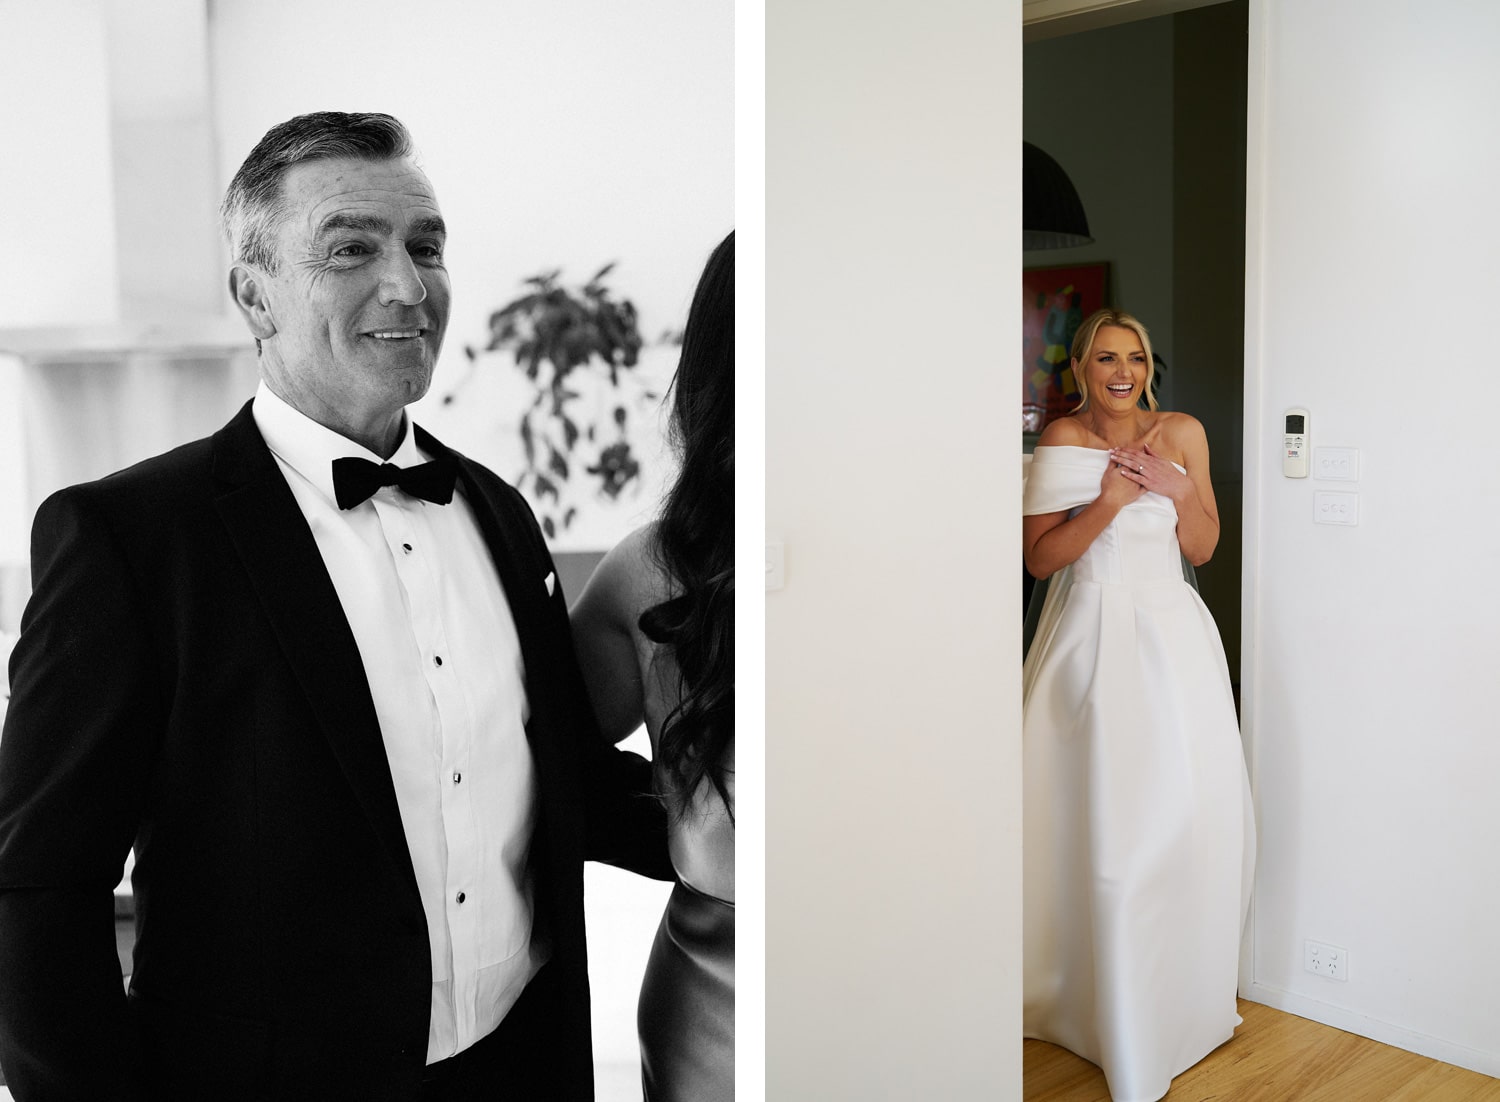 daughter reveal to father on wedding day in wedding dress